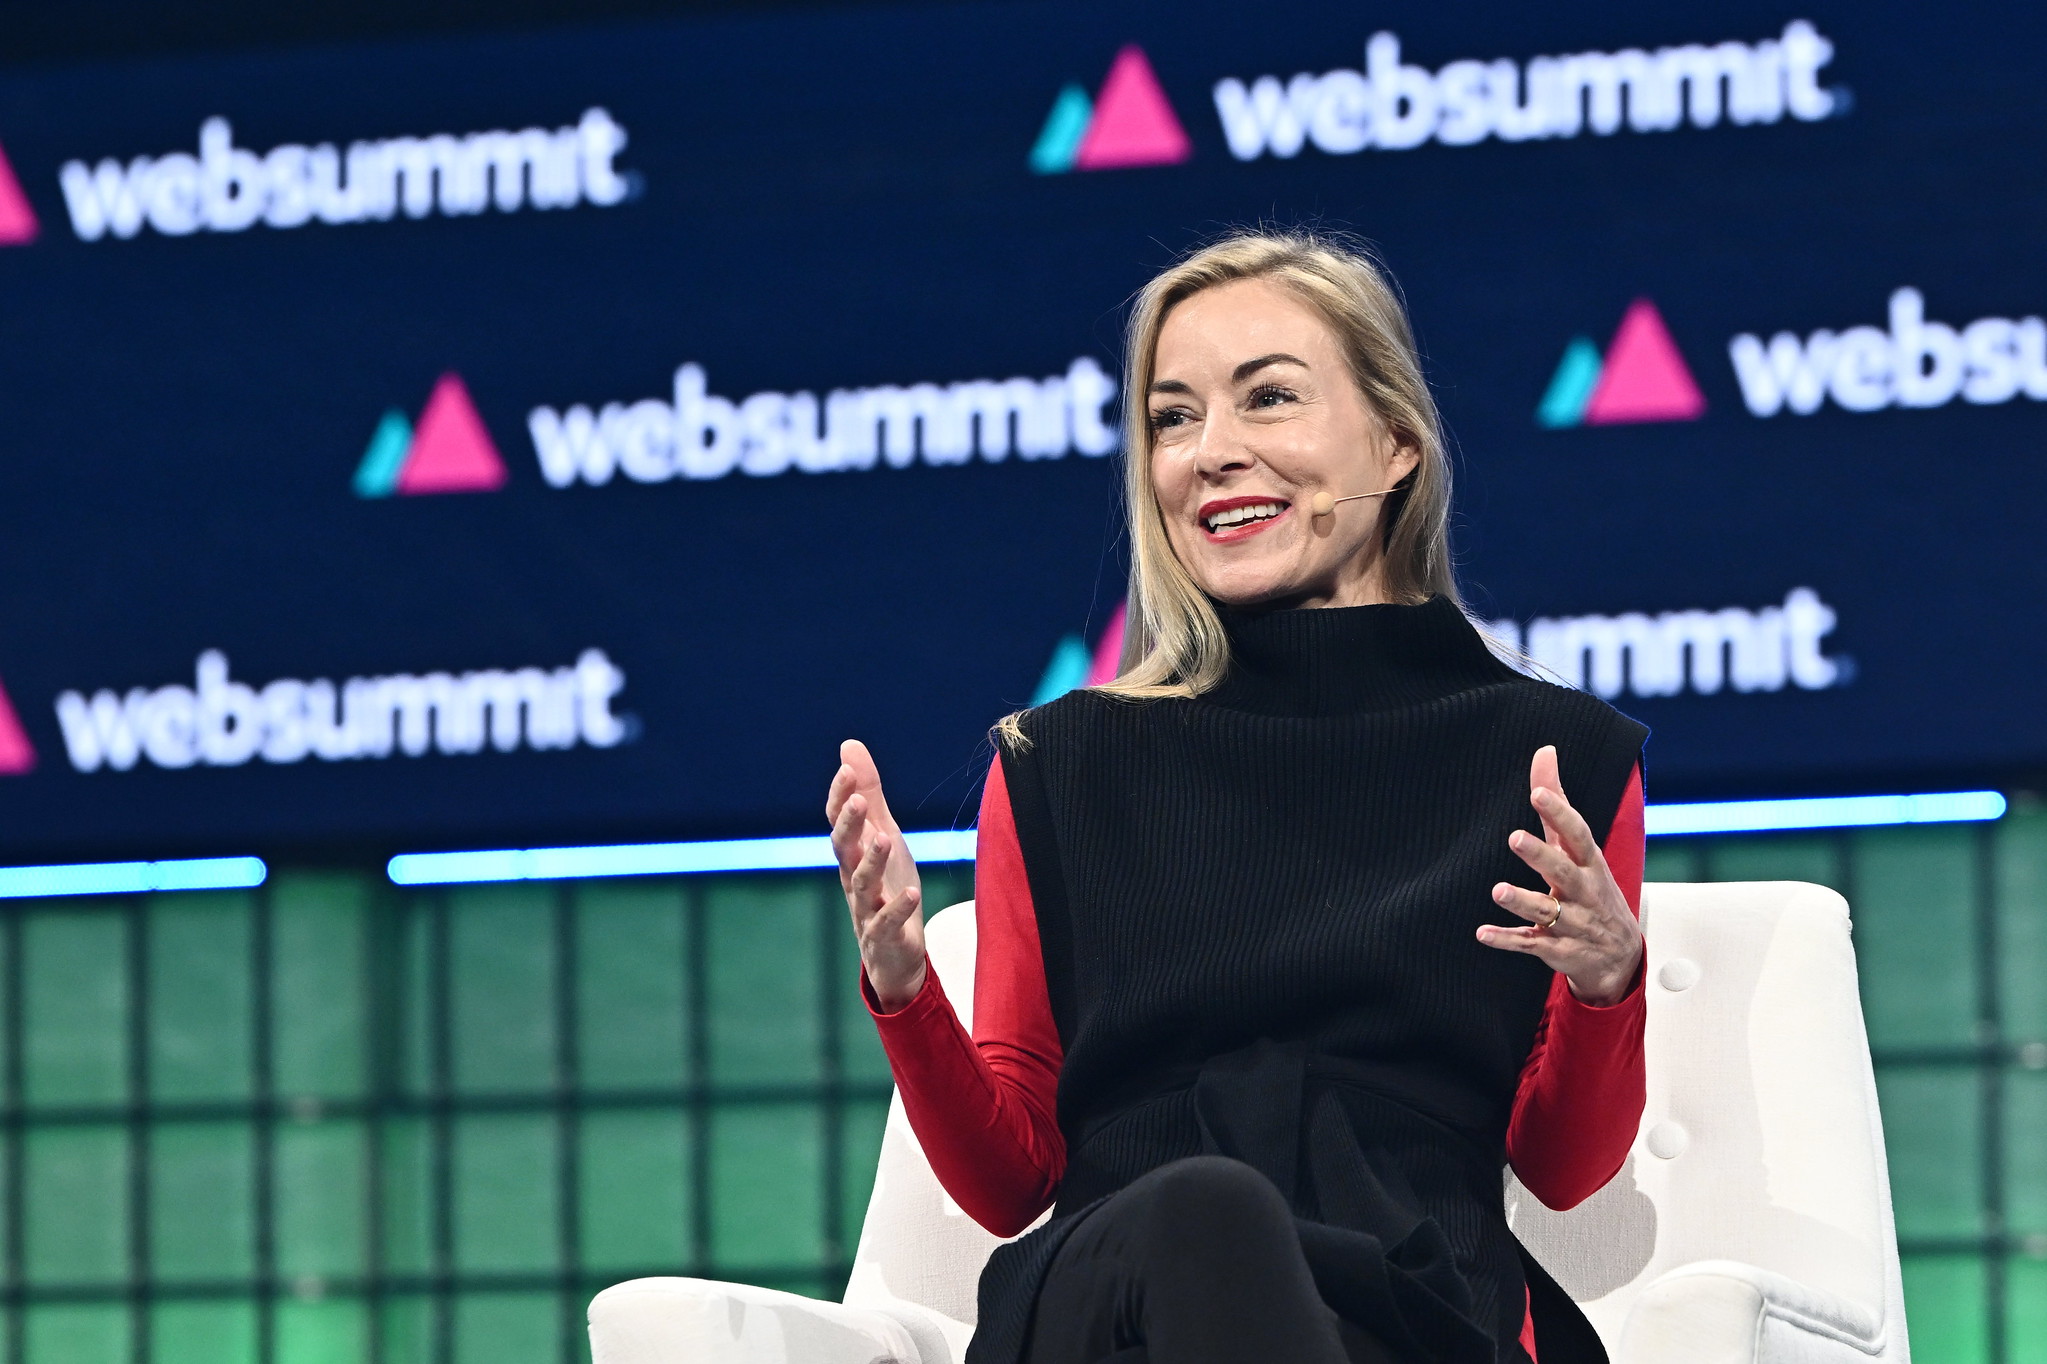 Sairah Ashman, Global CEO, Wolff Olins, on Centre Stage during day one of Web Summit 2023 at the Altice Arena in Lisbon, Portugal